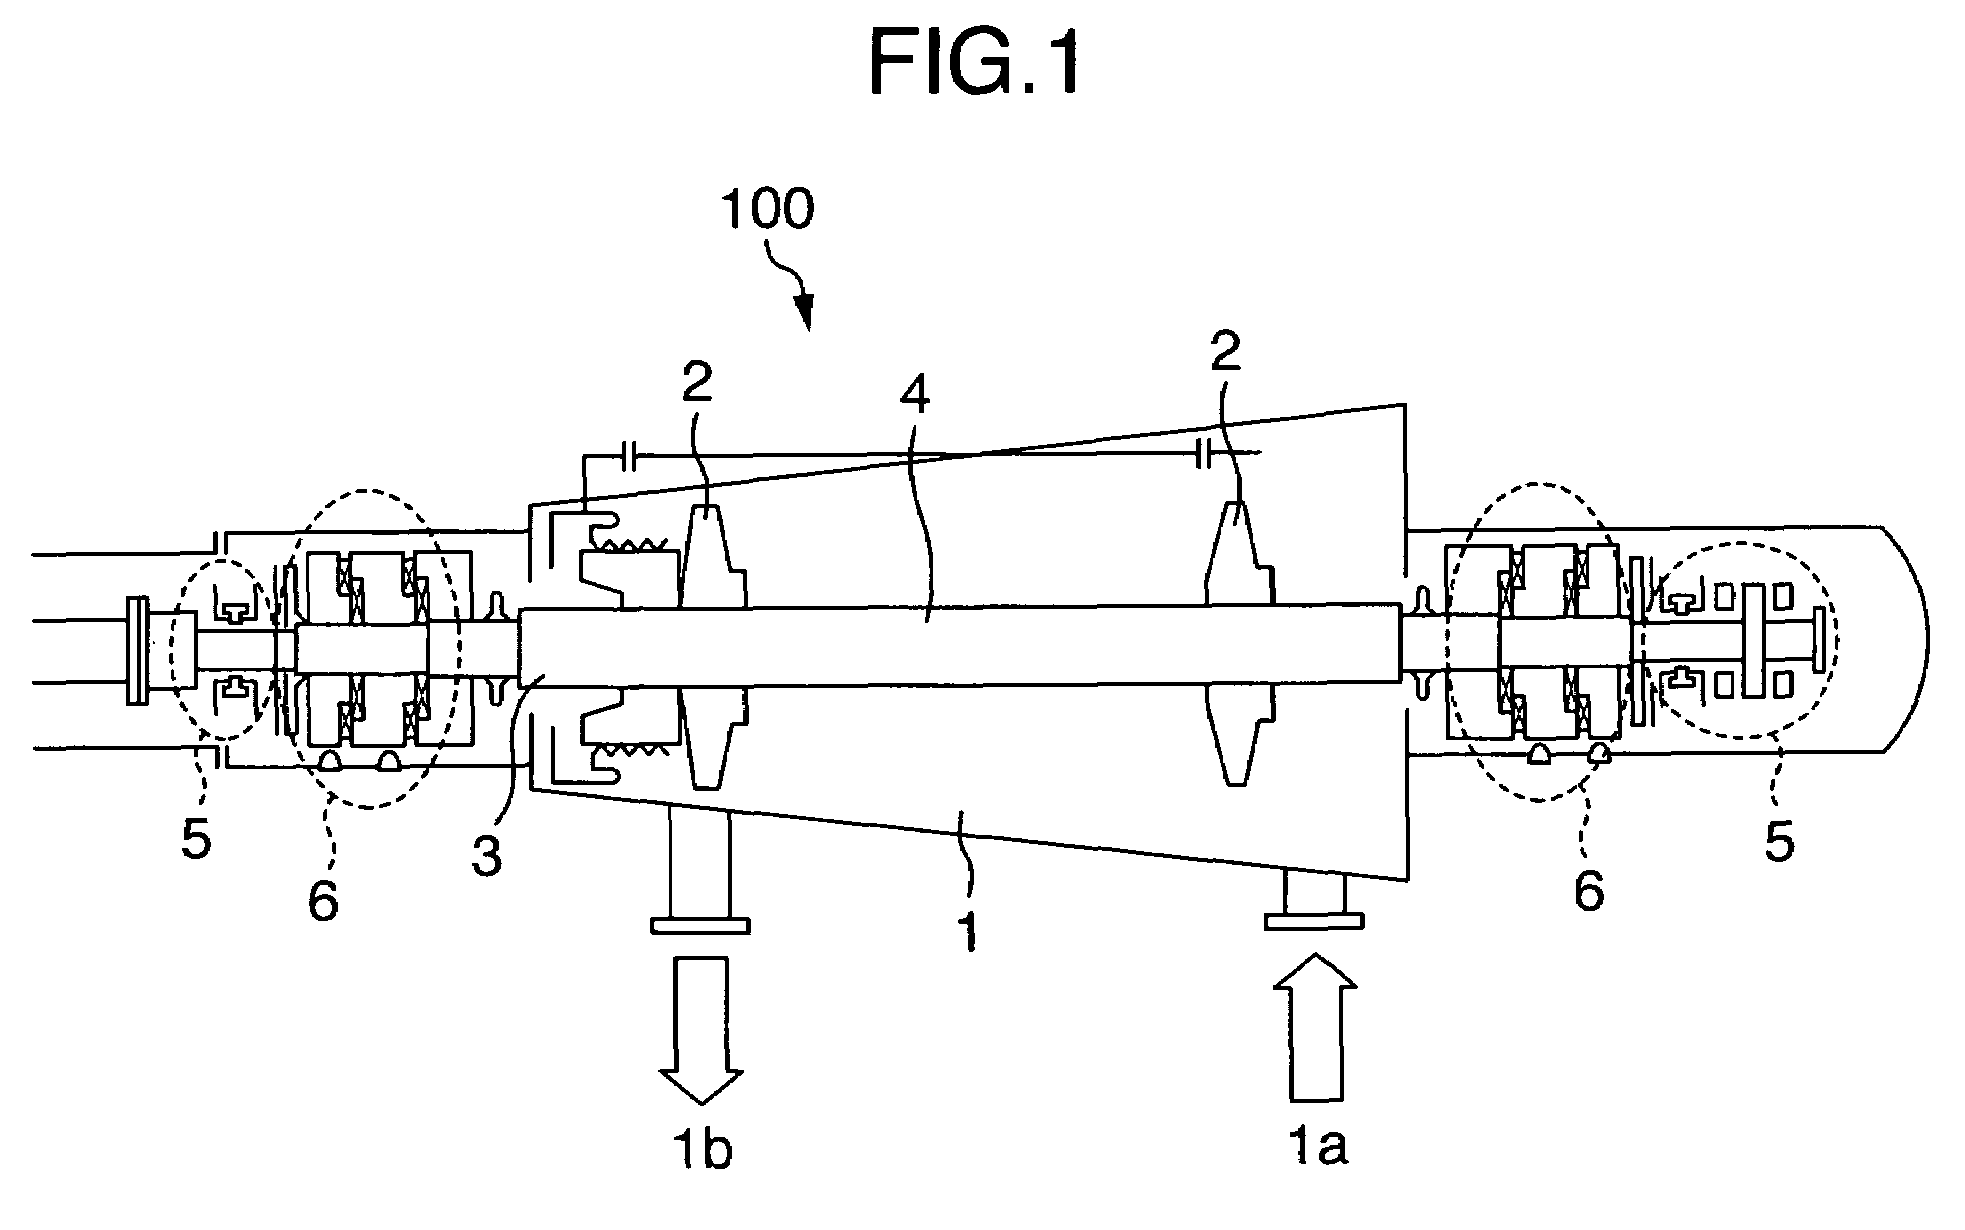 Centrifugal compressor and dry gas seal system for use in it